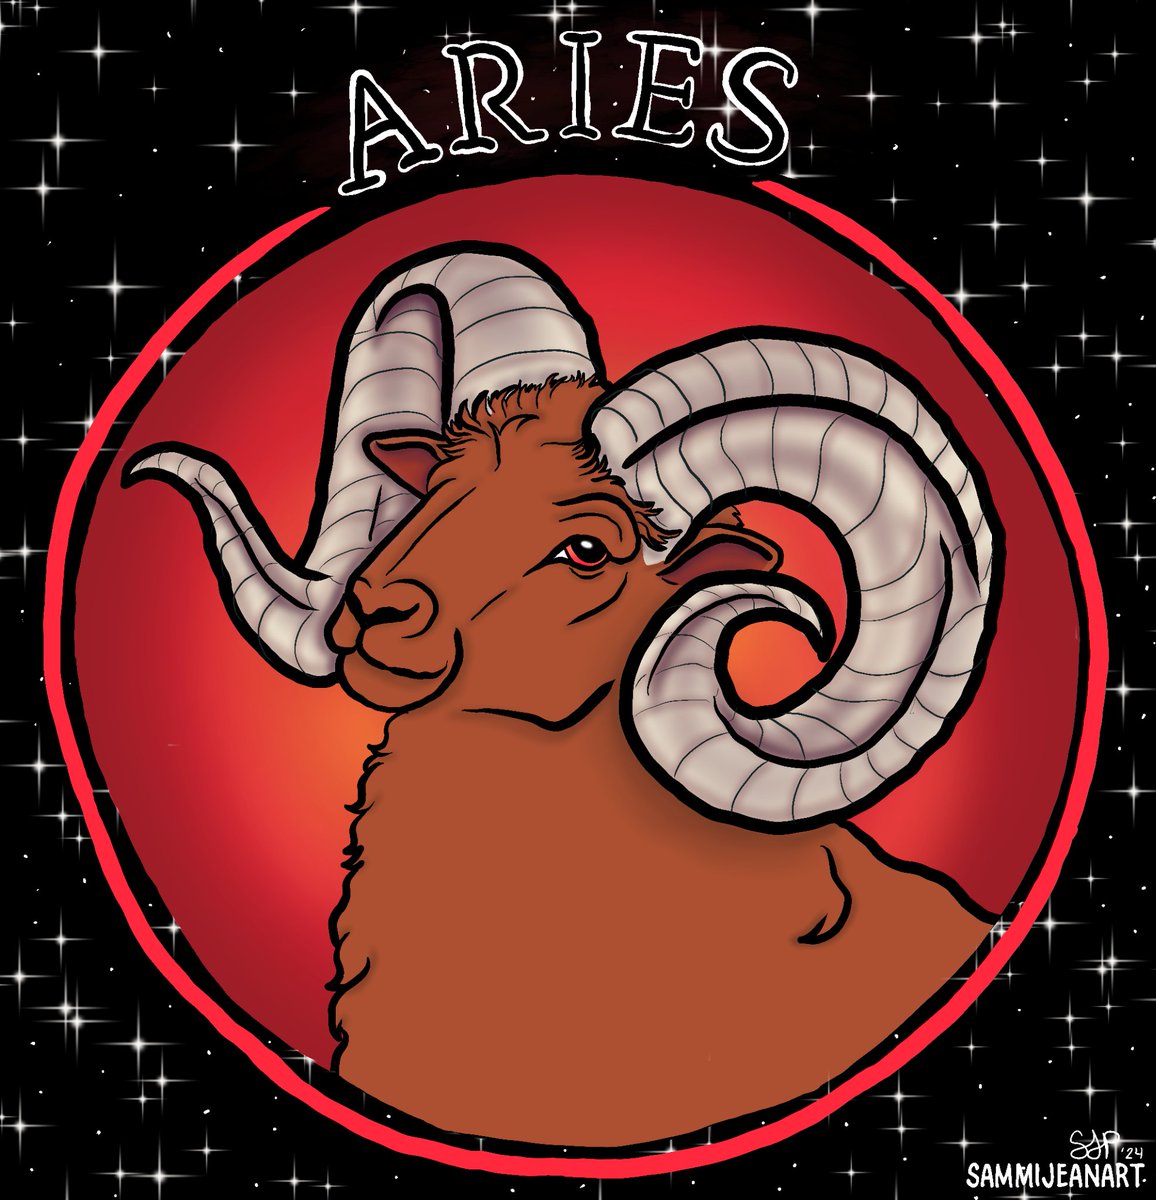 Day 17 of art i've done lately is... 'Aries' April is my birth month which is what inspired me to draw this 😁
#sammijeanart #commissionartist #Minnesota #art #drawing #ariesseason #aries #birthday #birthmonth #minnesotaartist #localartist #zodiacsigns #originalart #april #spring